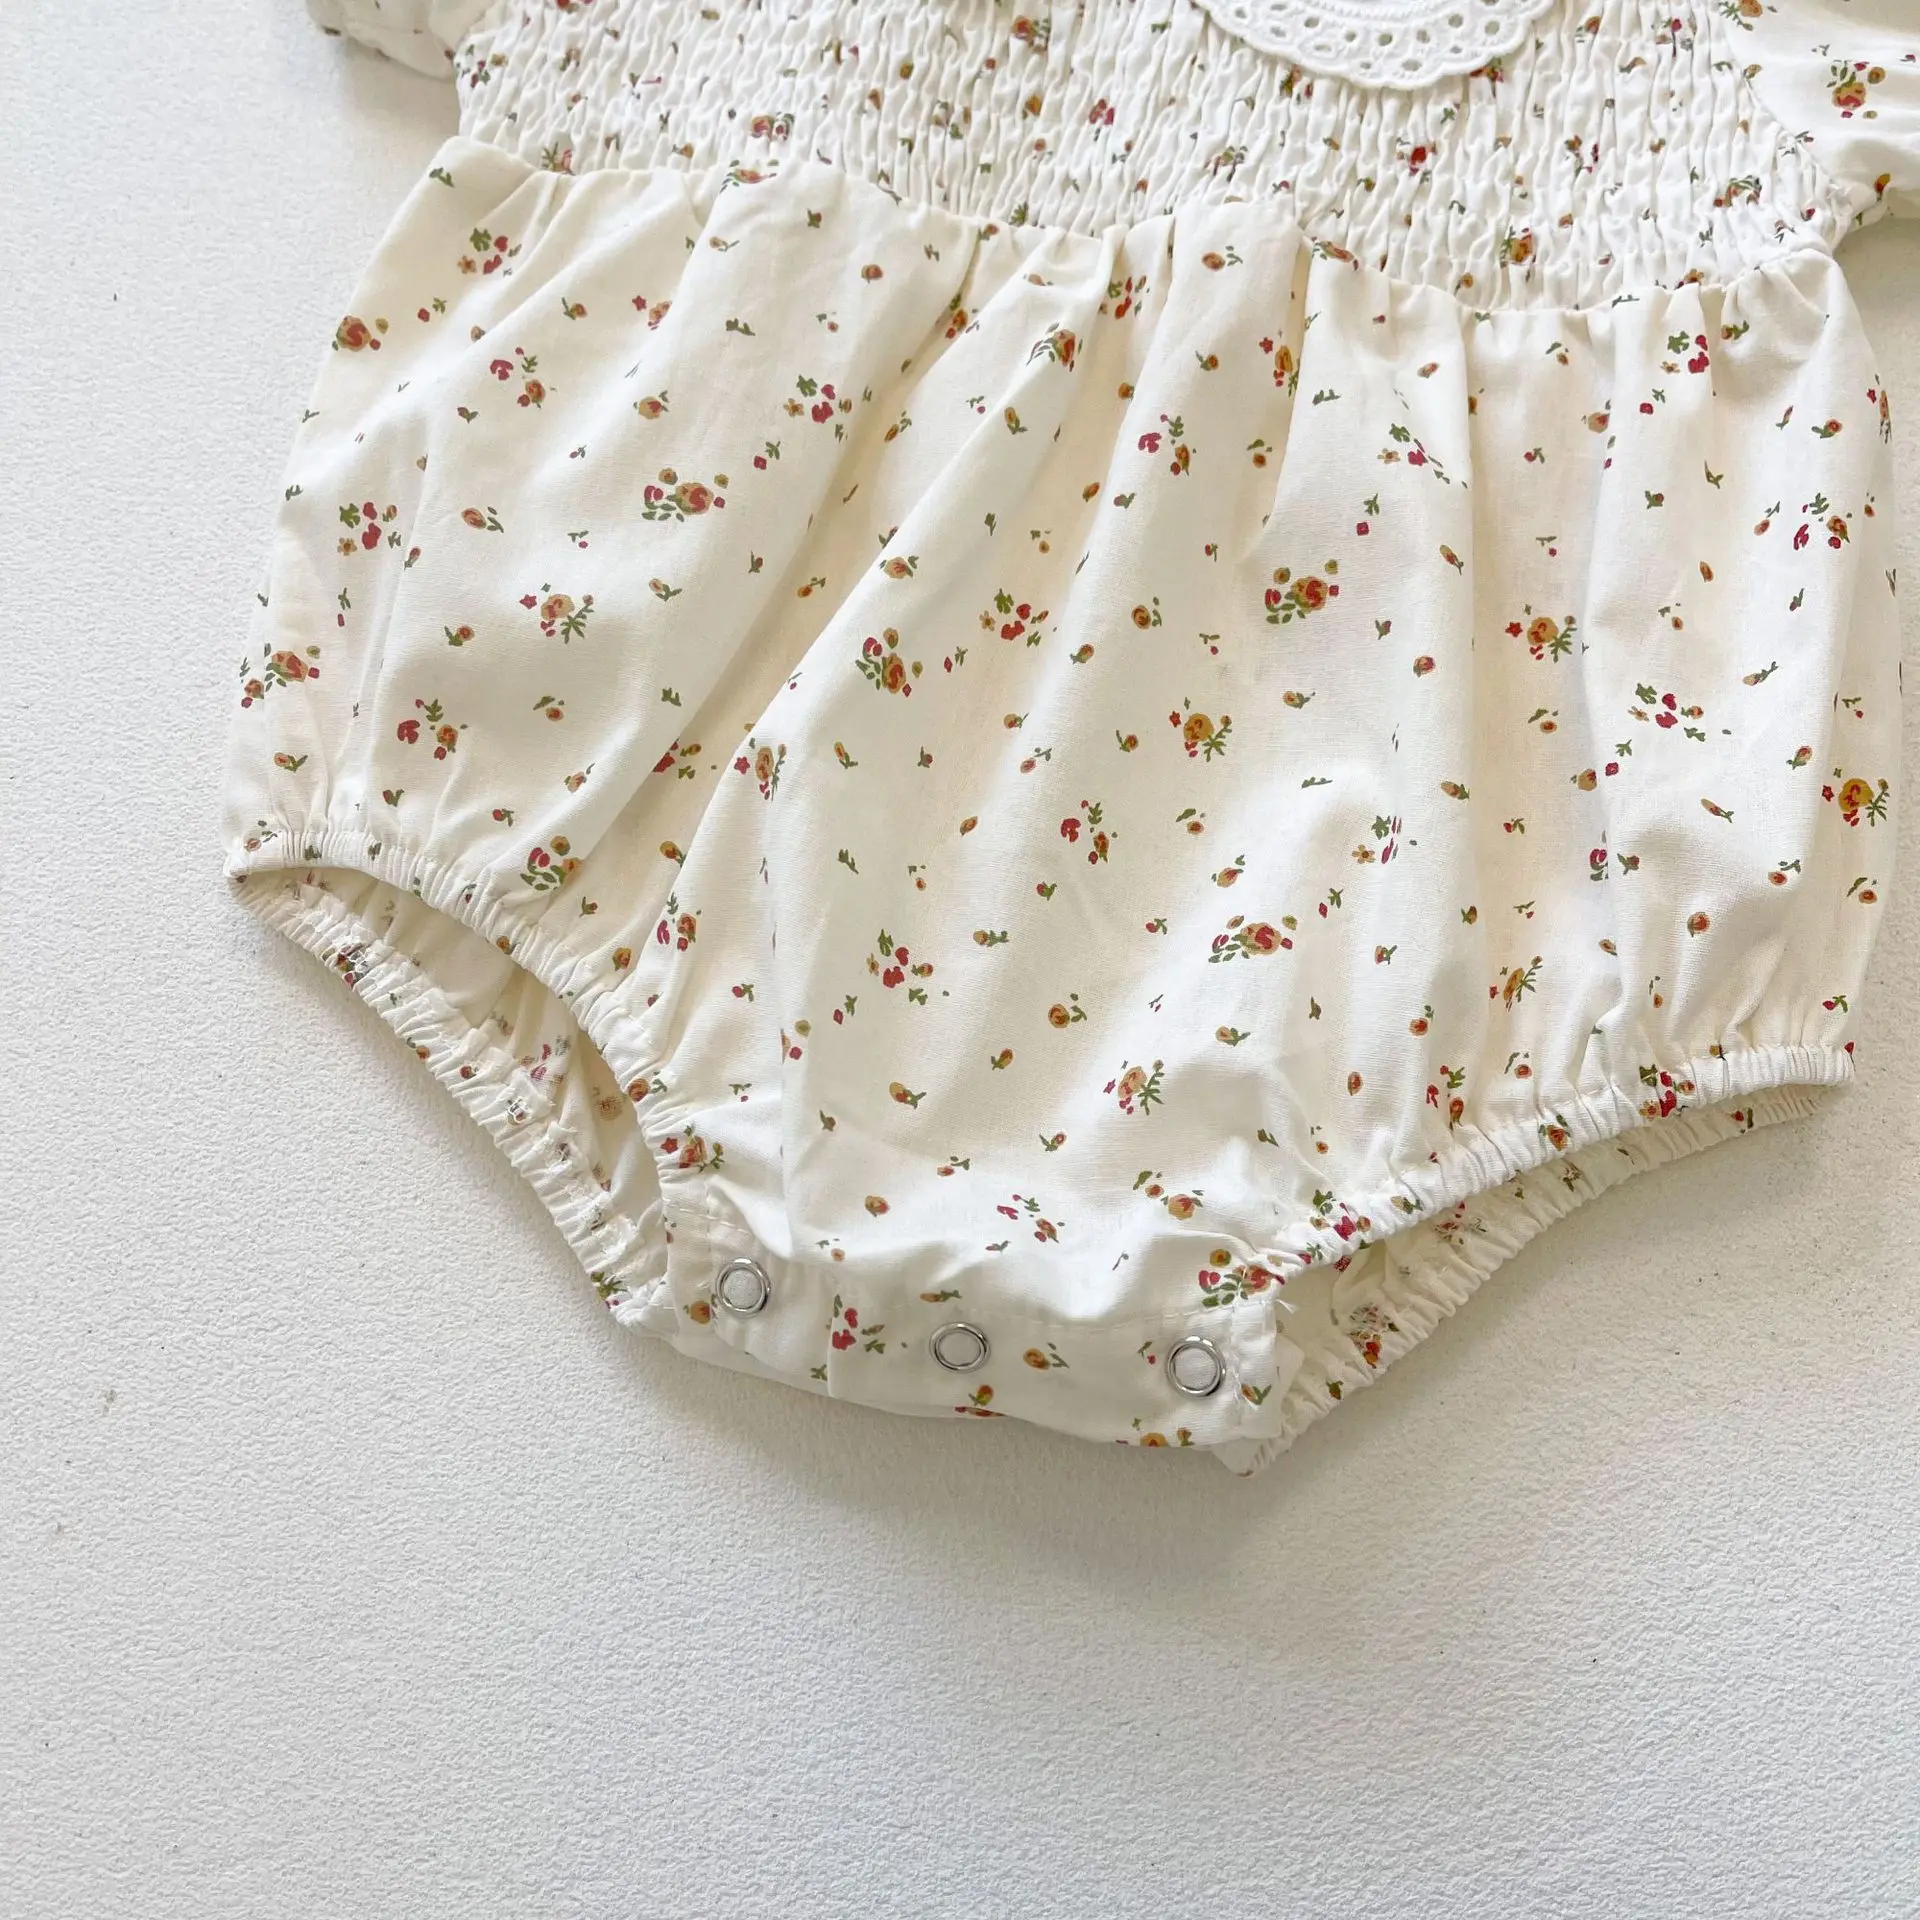 0-3T Newborn Kid Baby Girls Flower Print Clothes Short Sleeve Lace Romper Cute Sweet Jumpsuit Princess New born Body suit Outfit customised baby bodysuits Baby Rompers